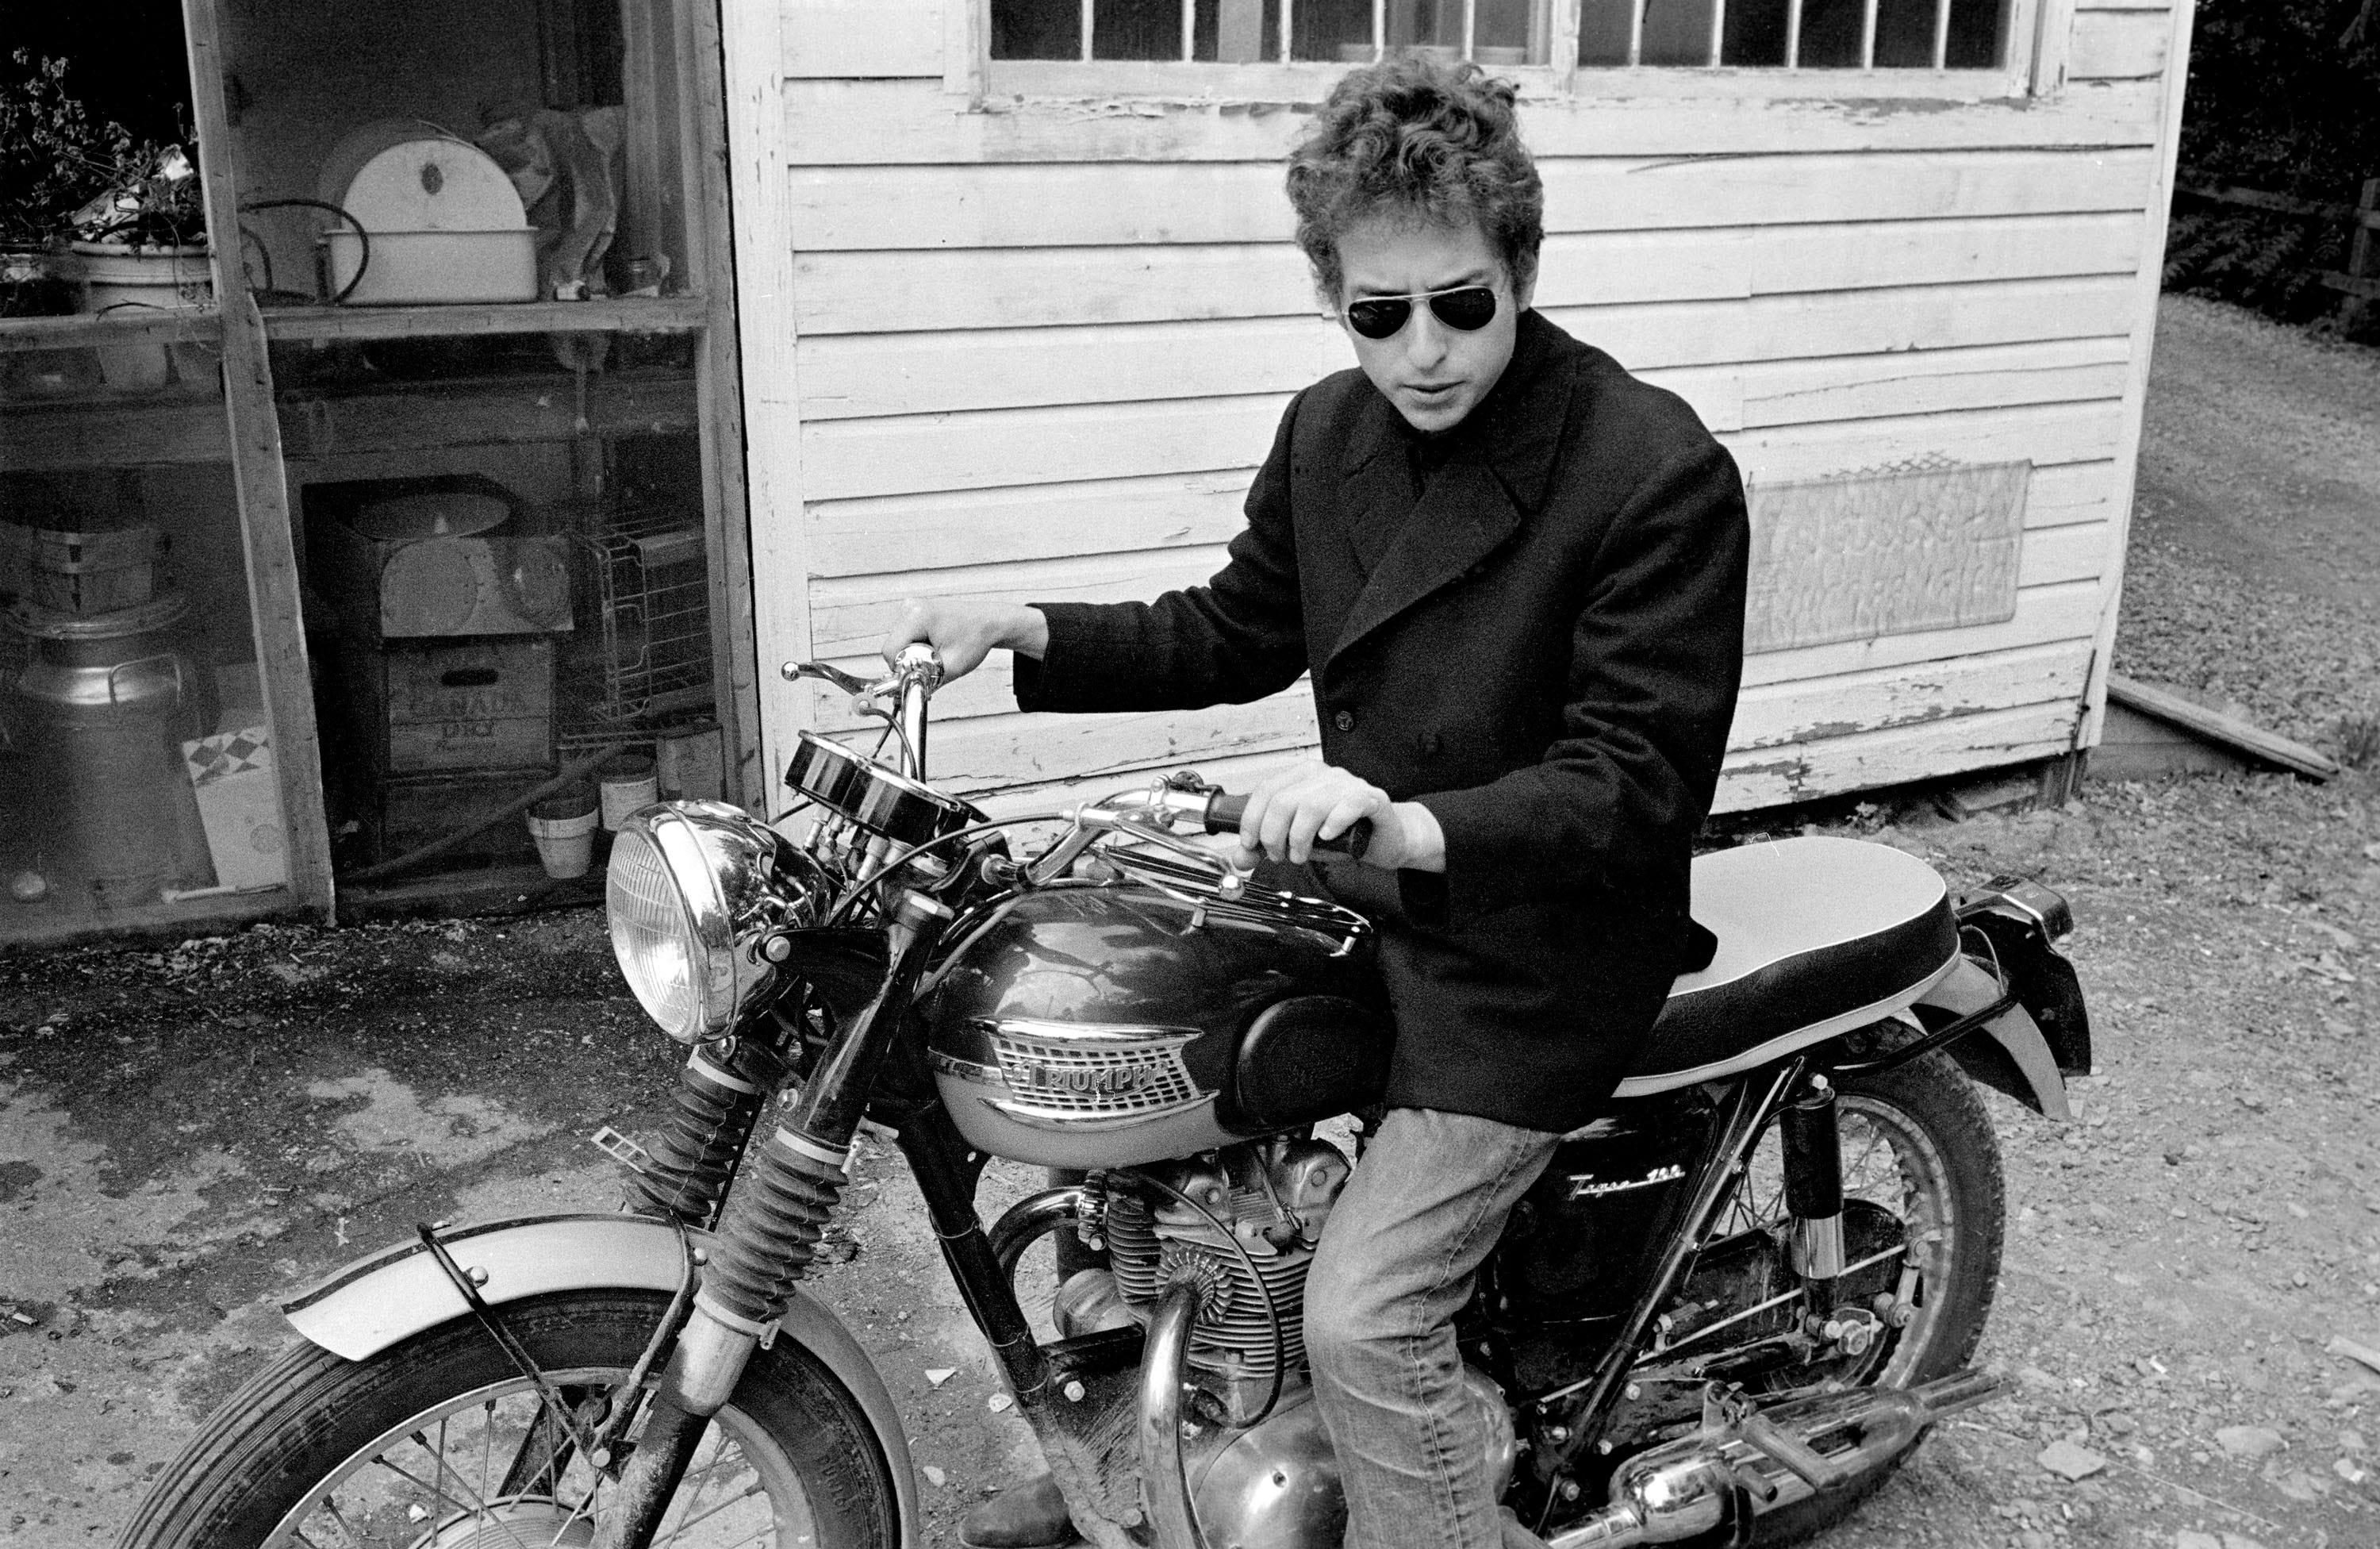 Bob Dylan astride his Triumph motorcycle in Woodstock, New York. (1964)